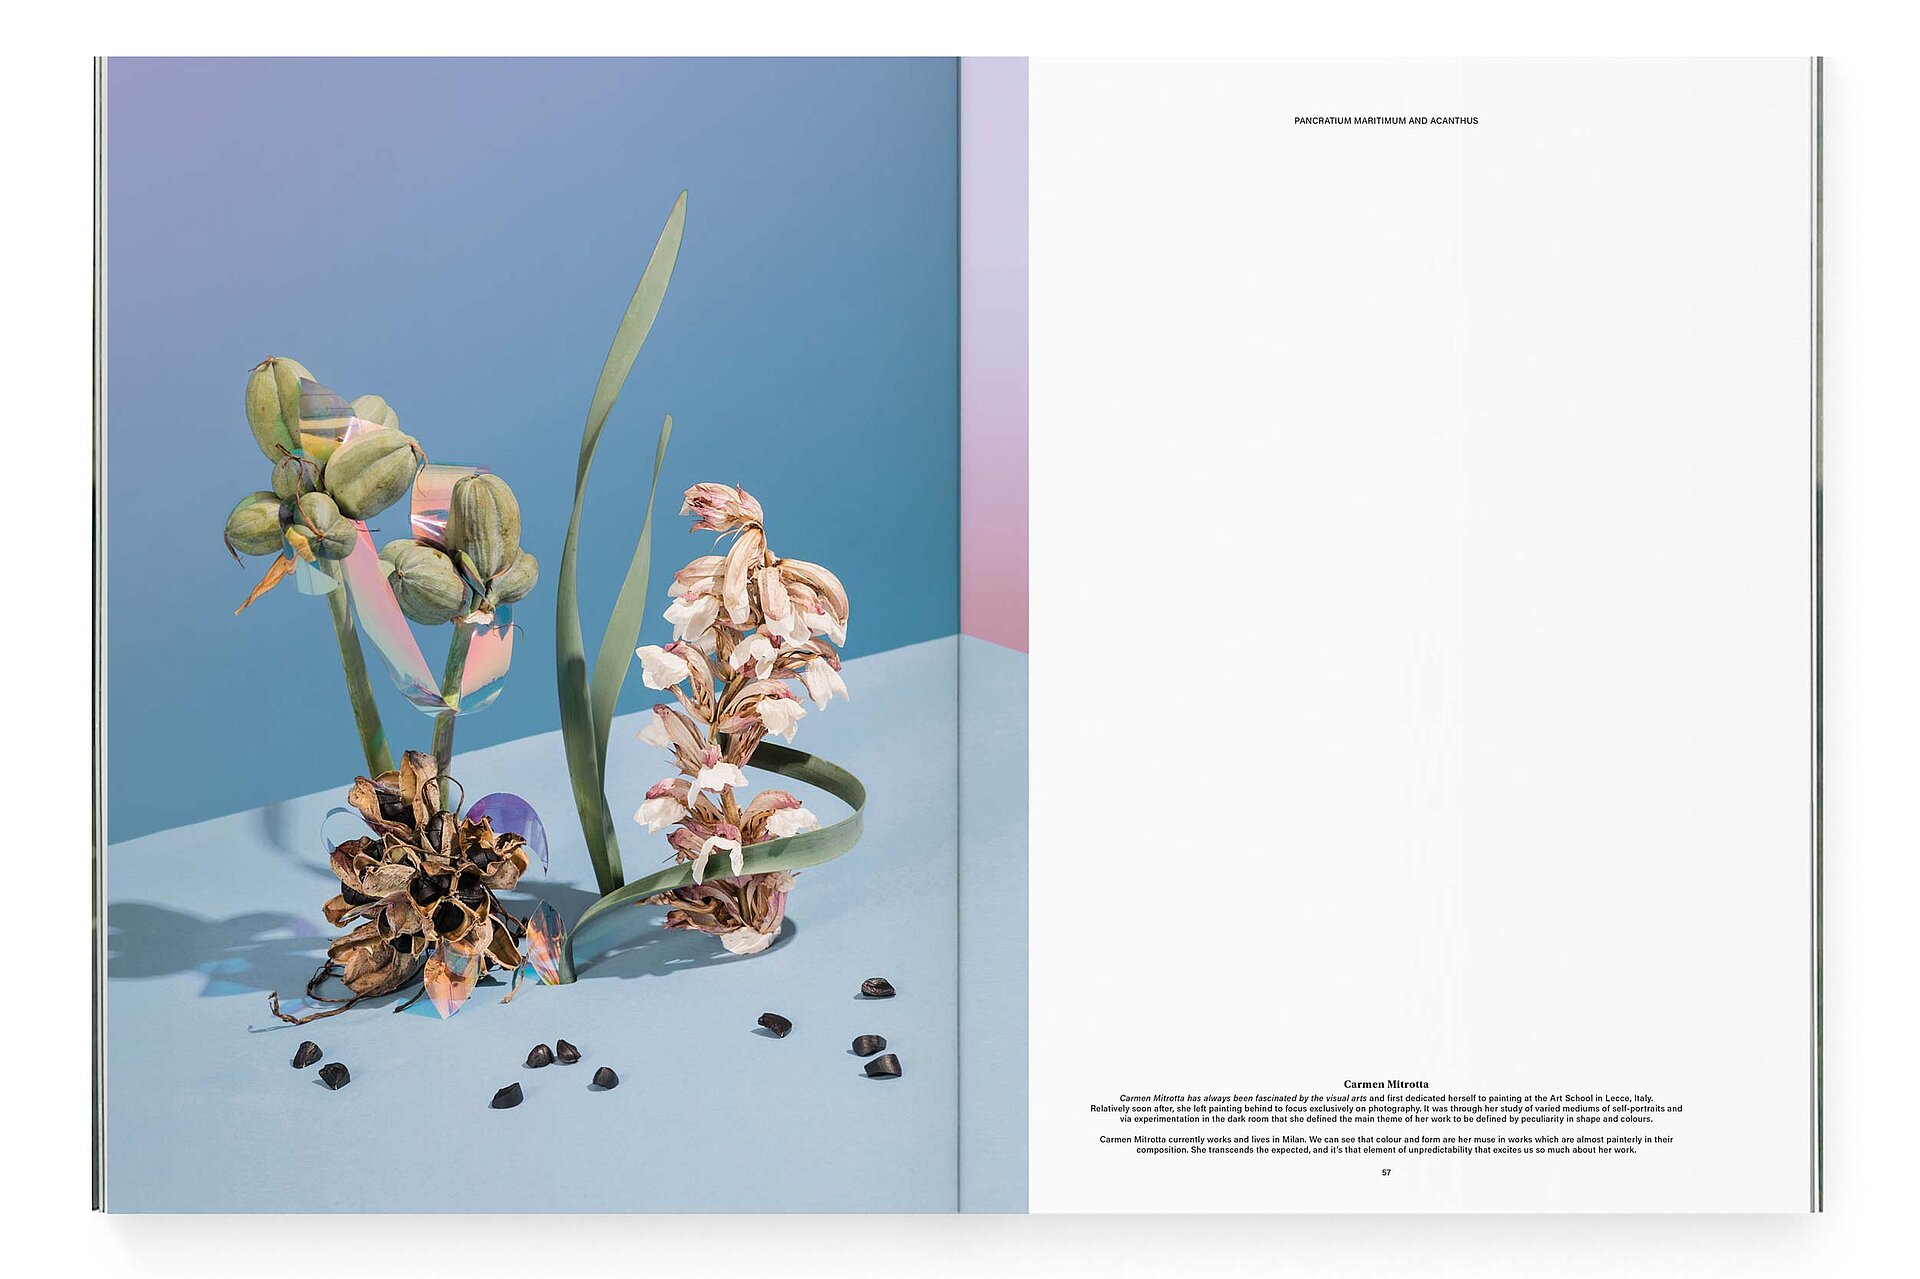 mjr magazine pages with installation with flowers and seeds design bern